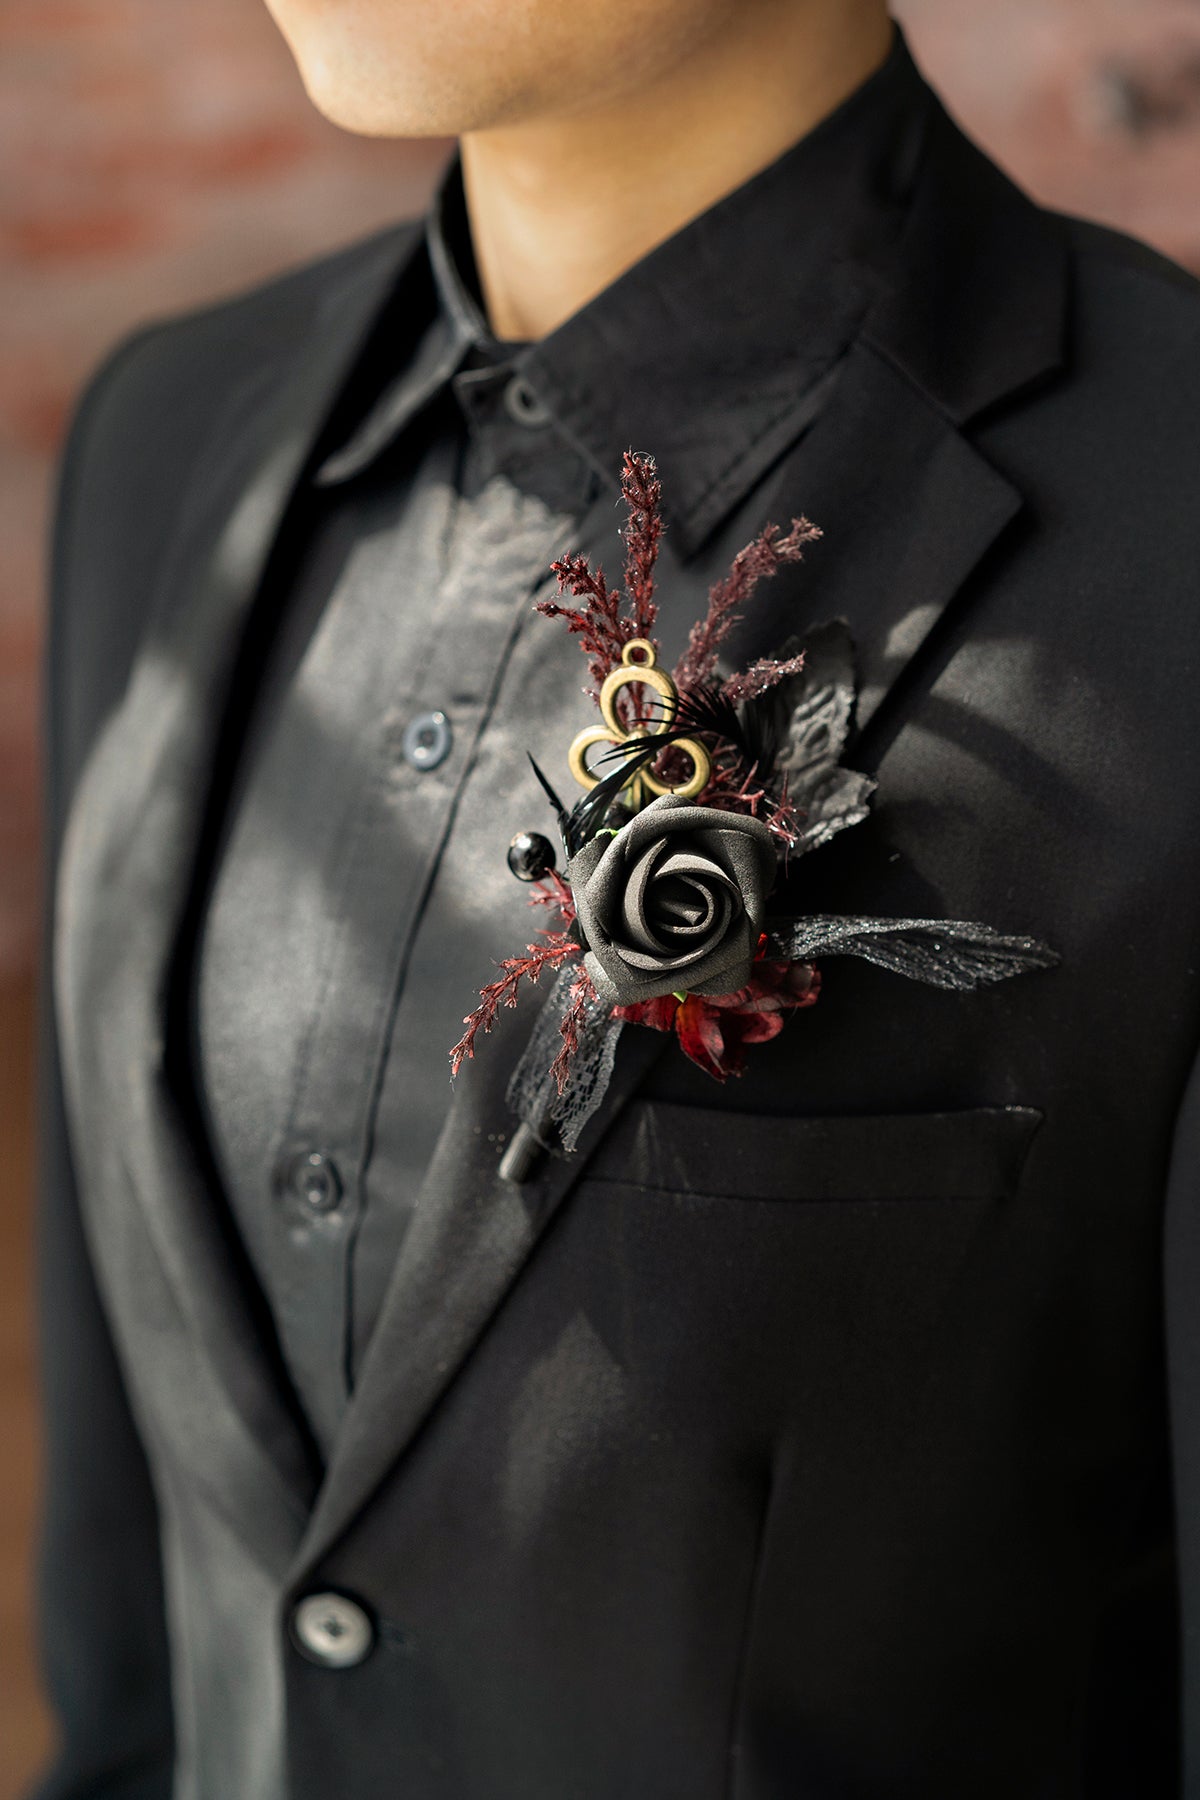 Boutonnieres in Moody Burgundy & Black